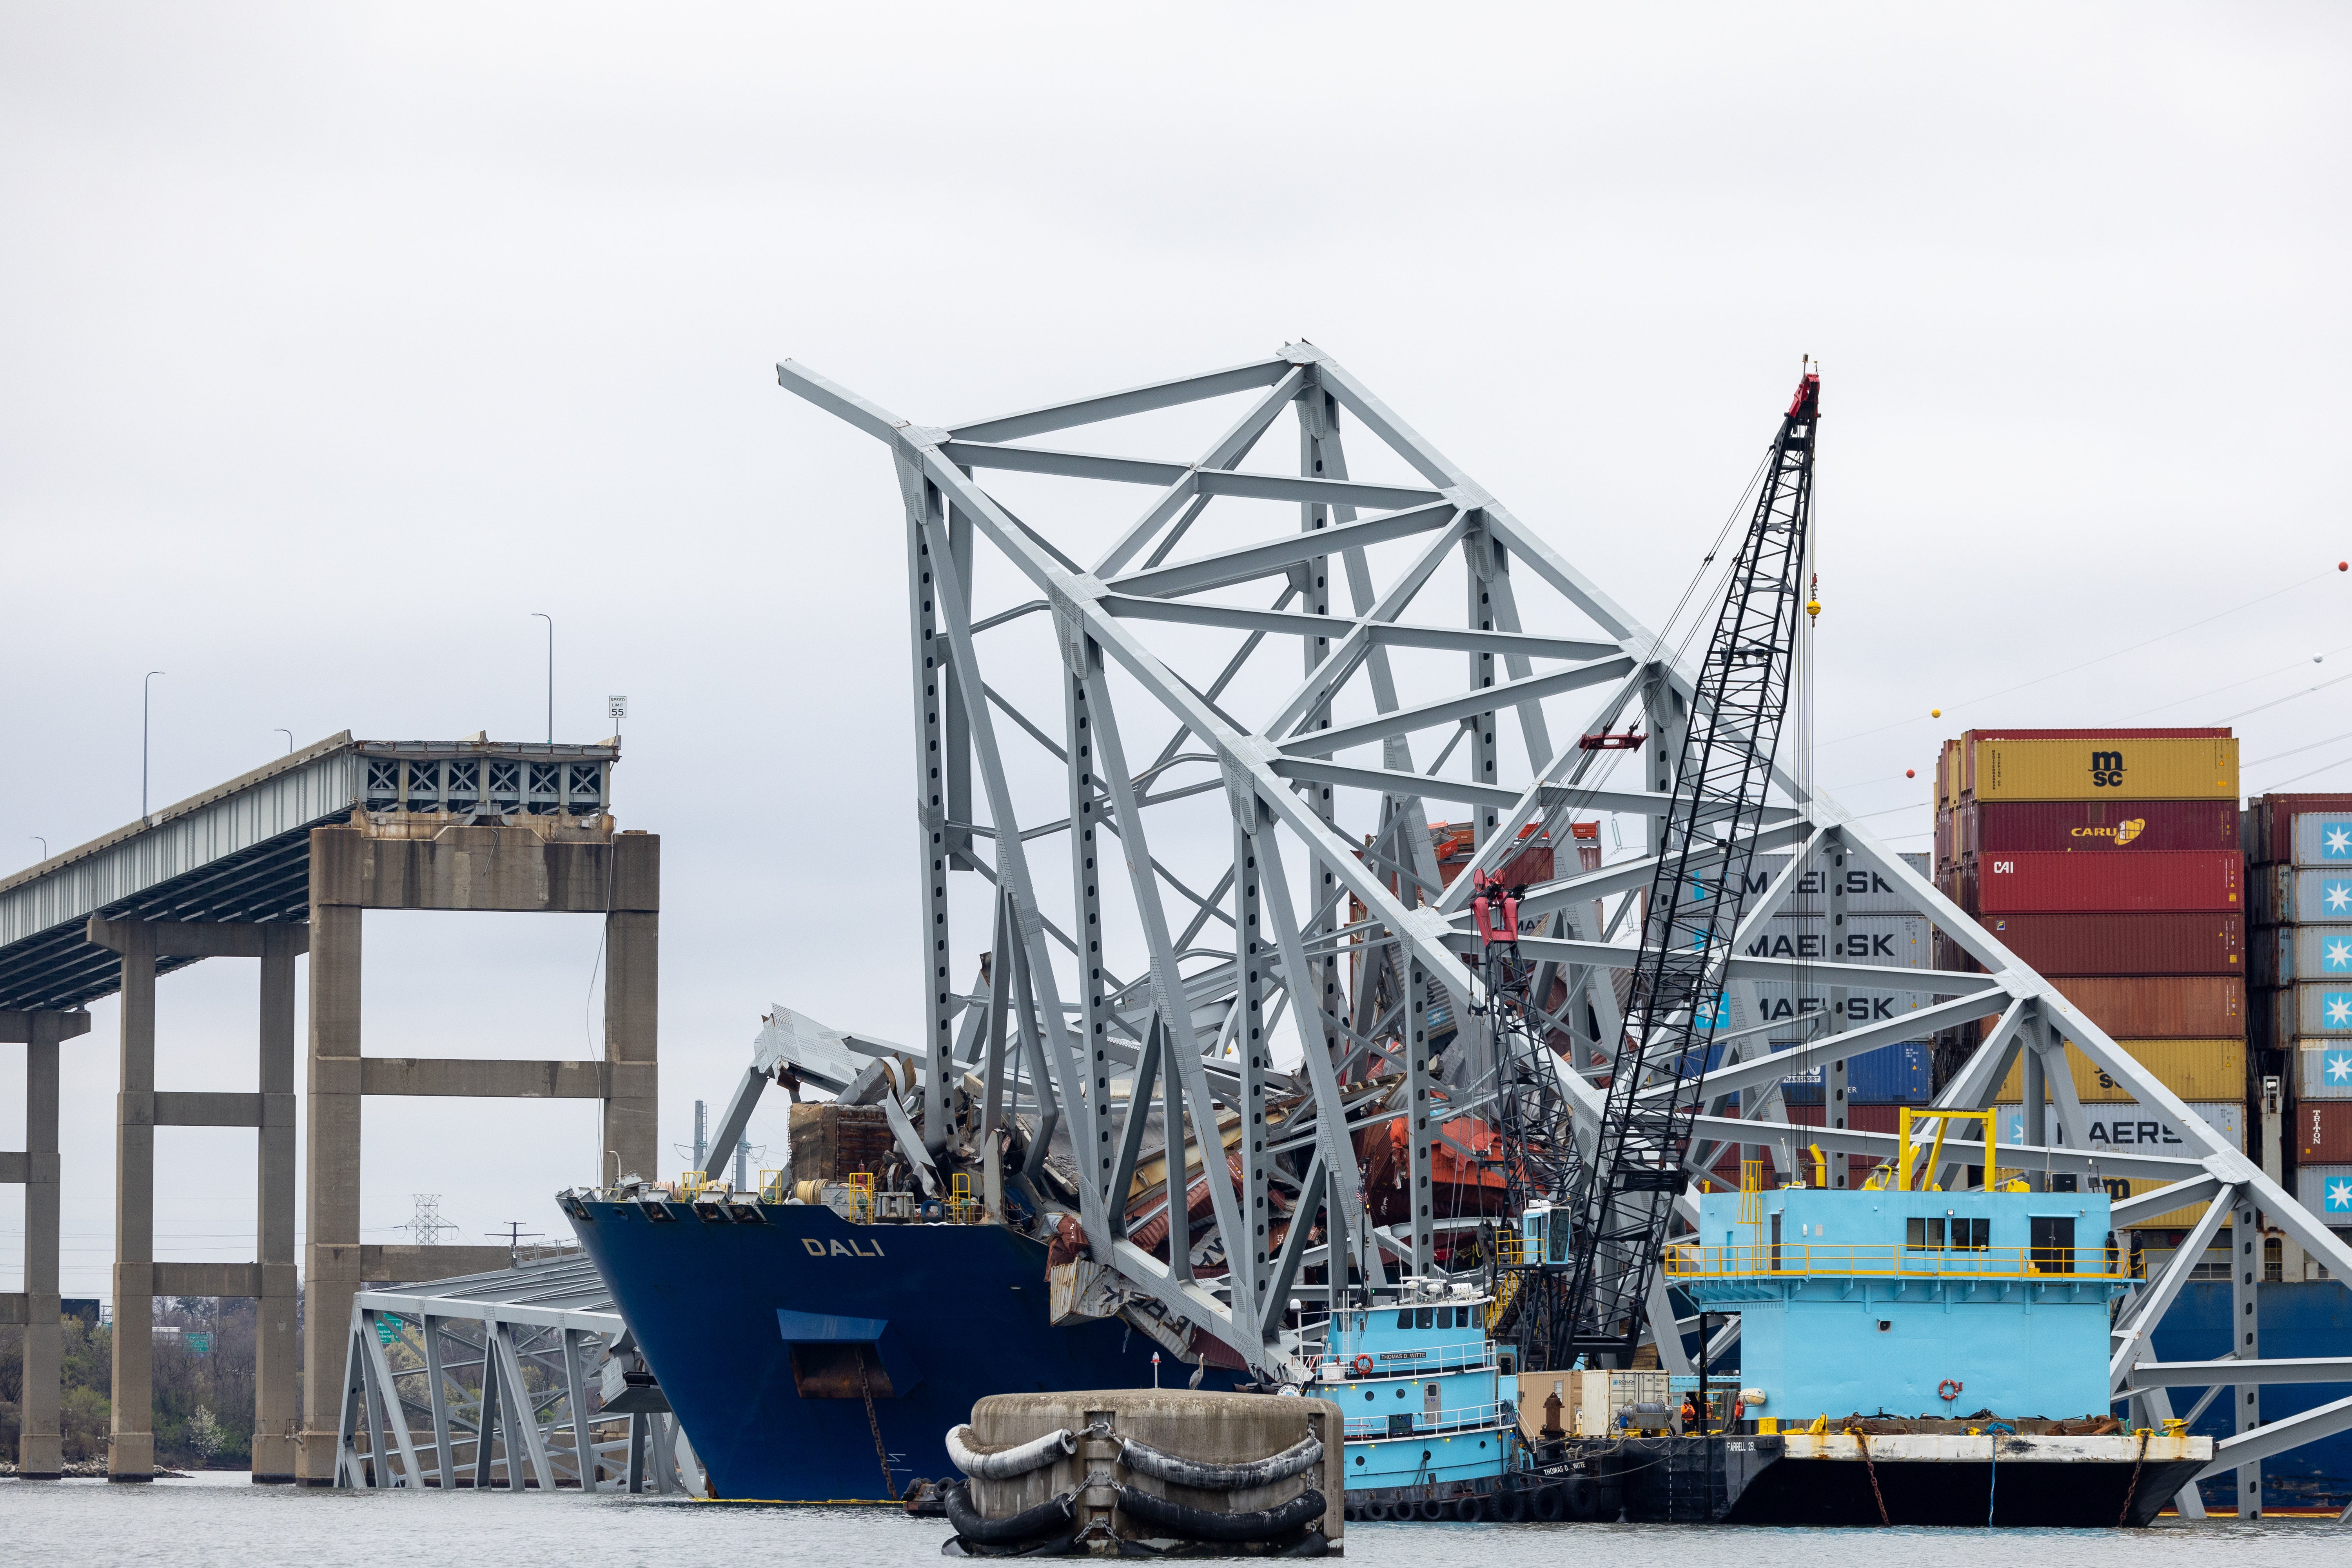 Wreckage from collapsed Francis Scott Key Bridge rests on cargo ship Dali